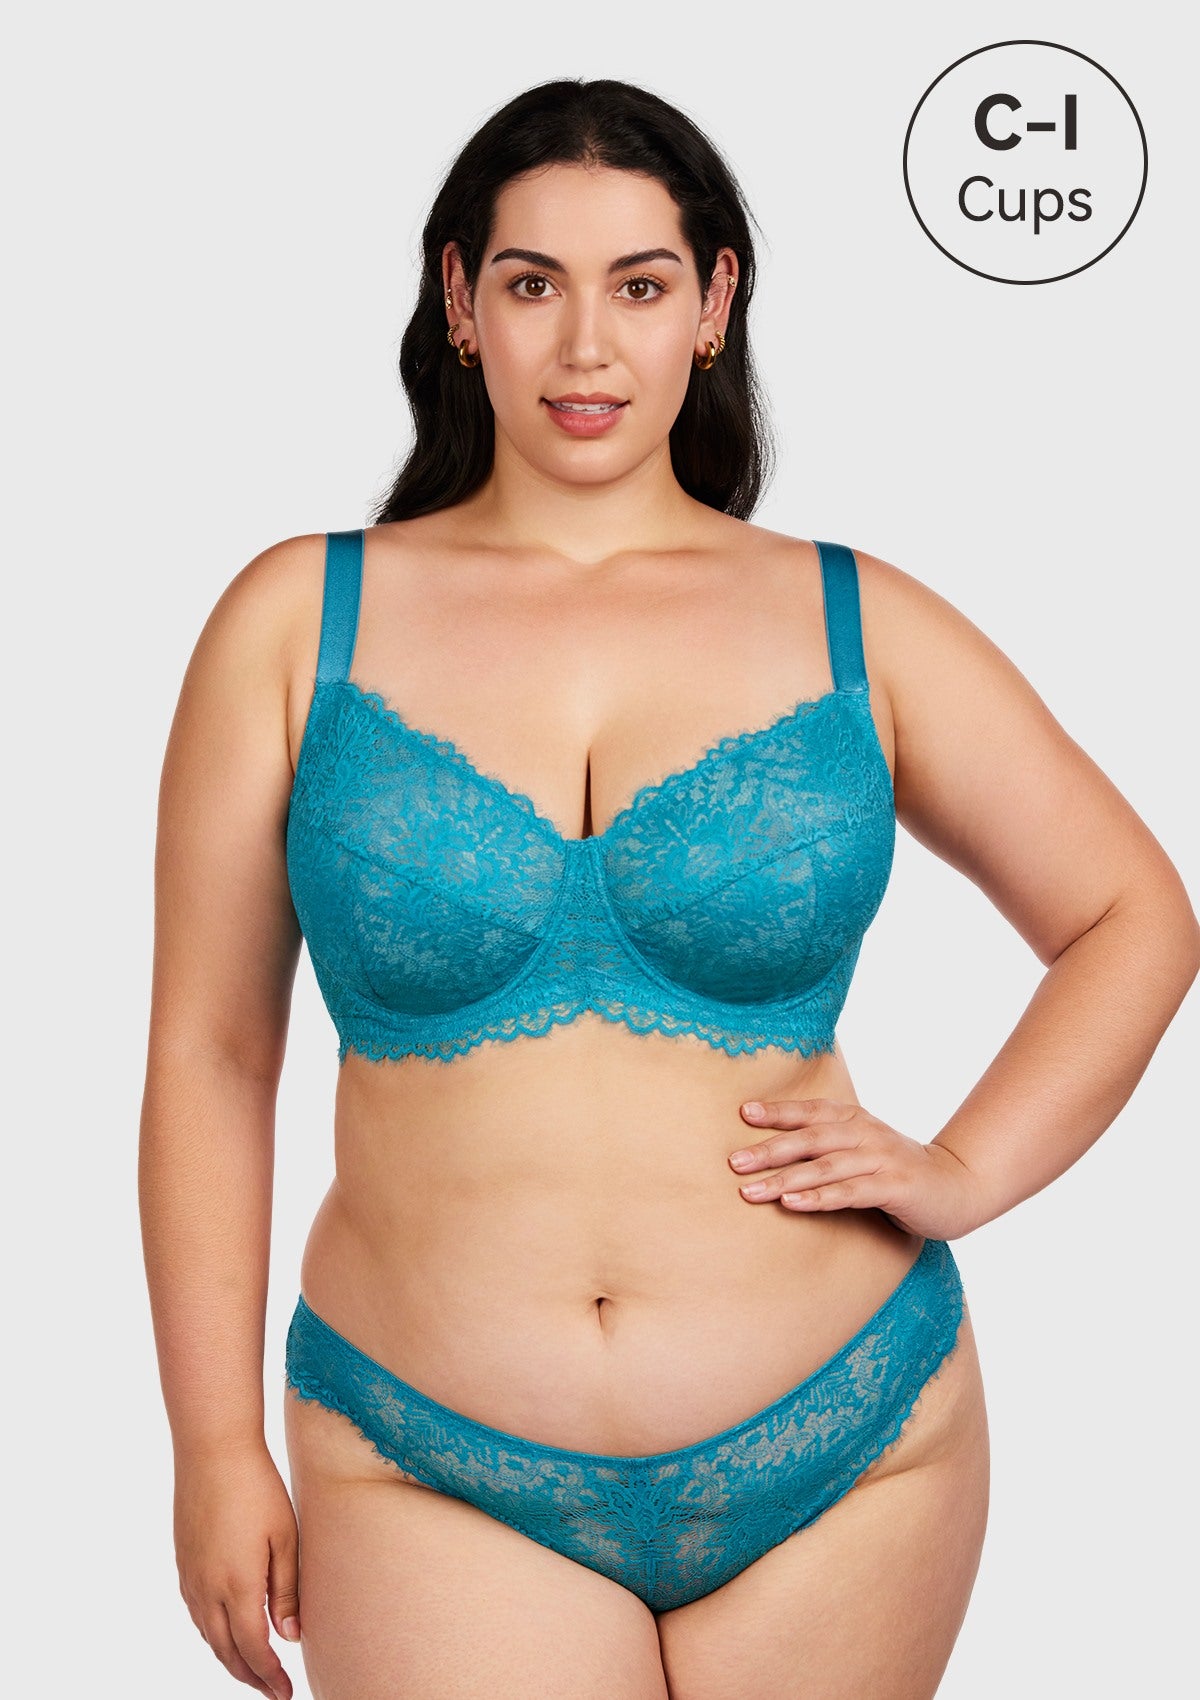 HSIA Sunflower Unlined Lace Bra: Best Bra For Wide Set Breasts - Sky Blue / 44 / H